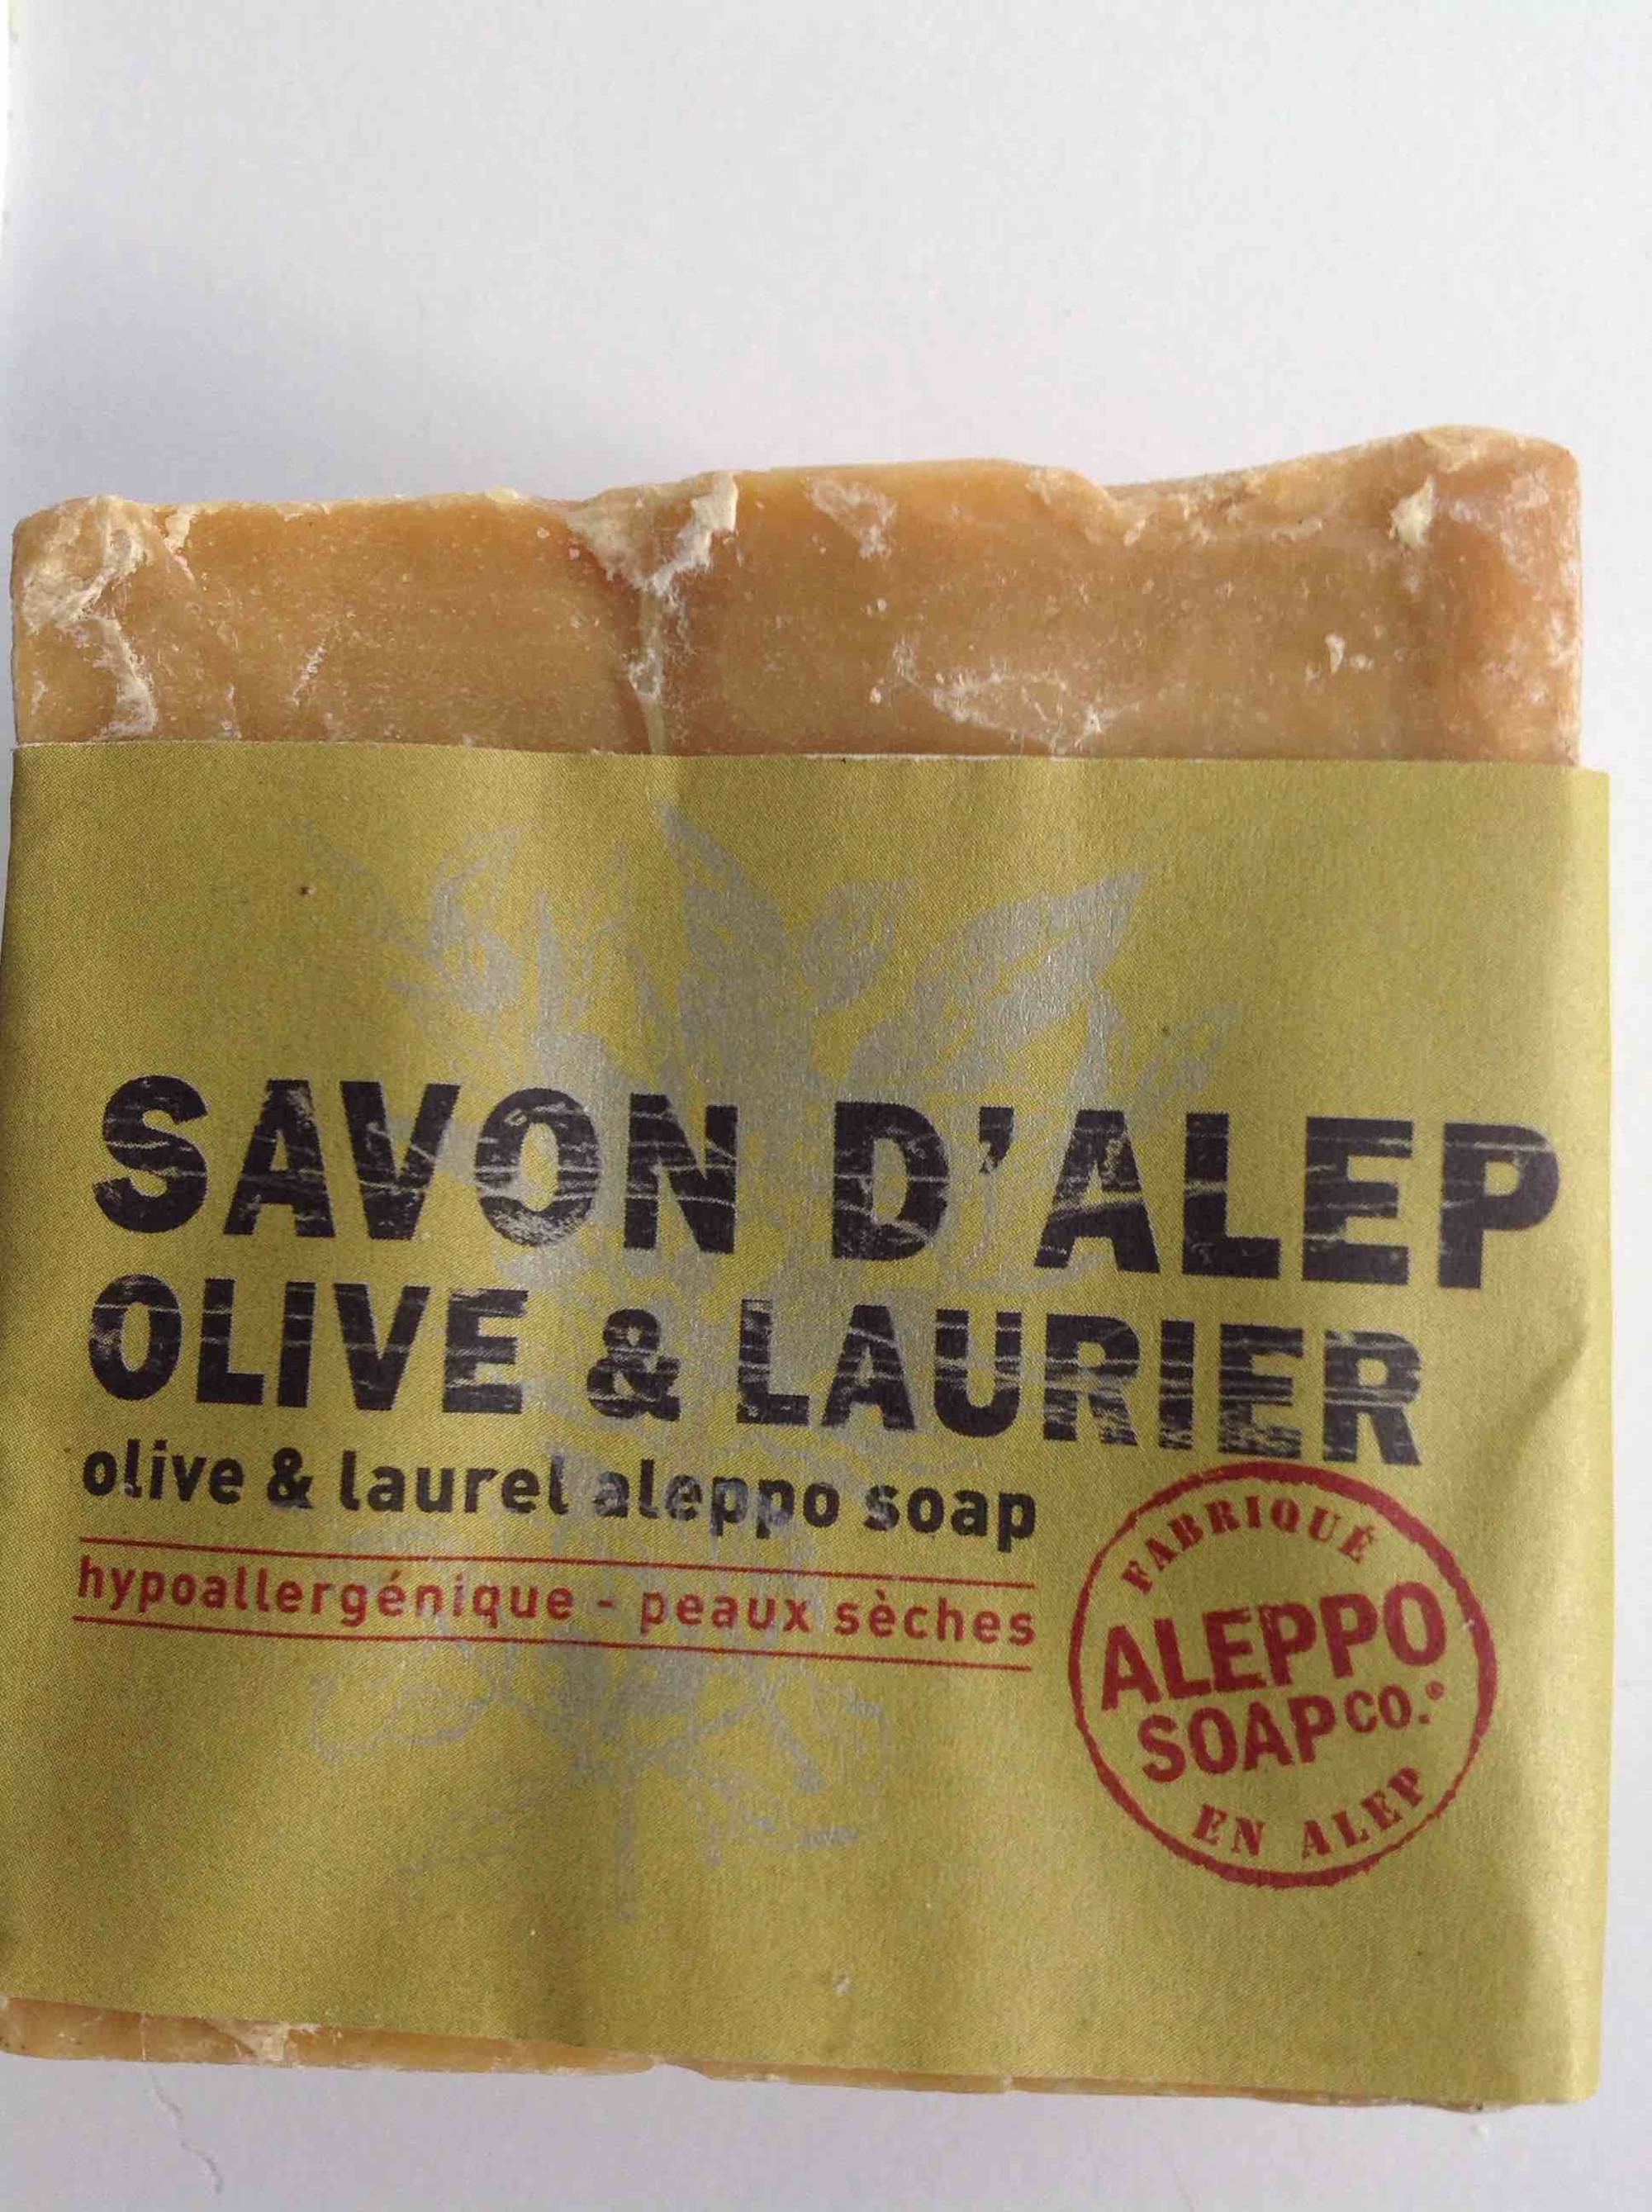 ALEPPO SOAP CO. - Savon d'Alep - Olive & Laurier